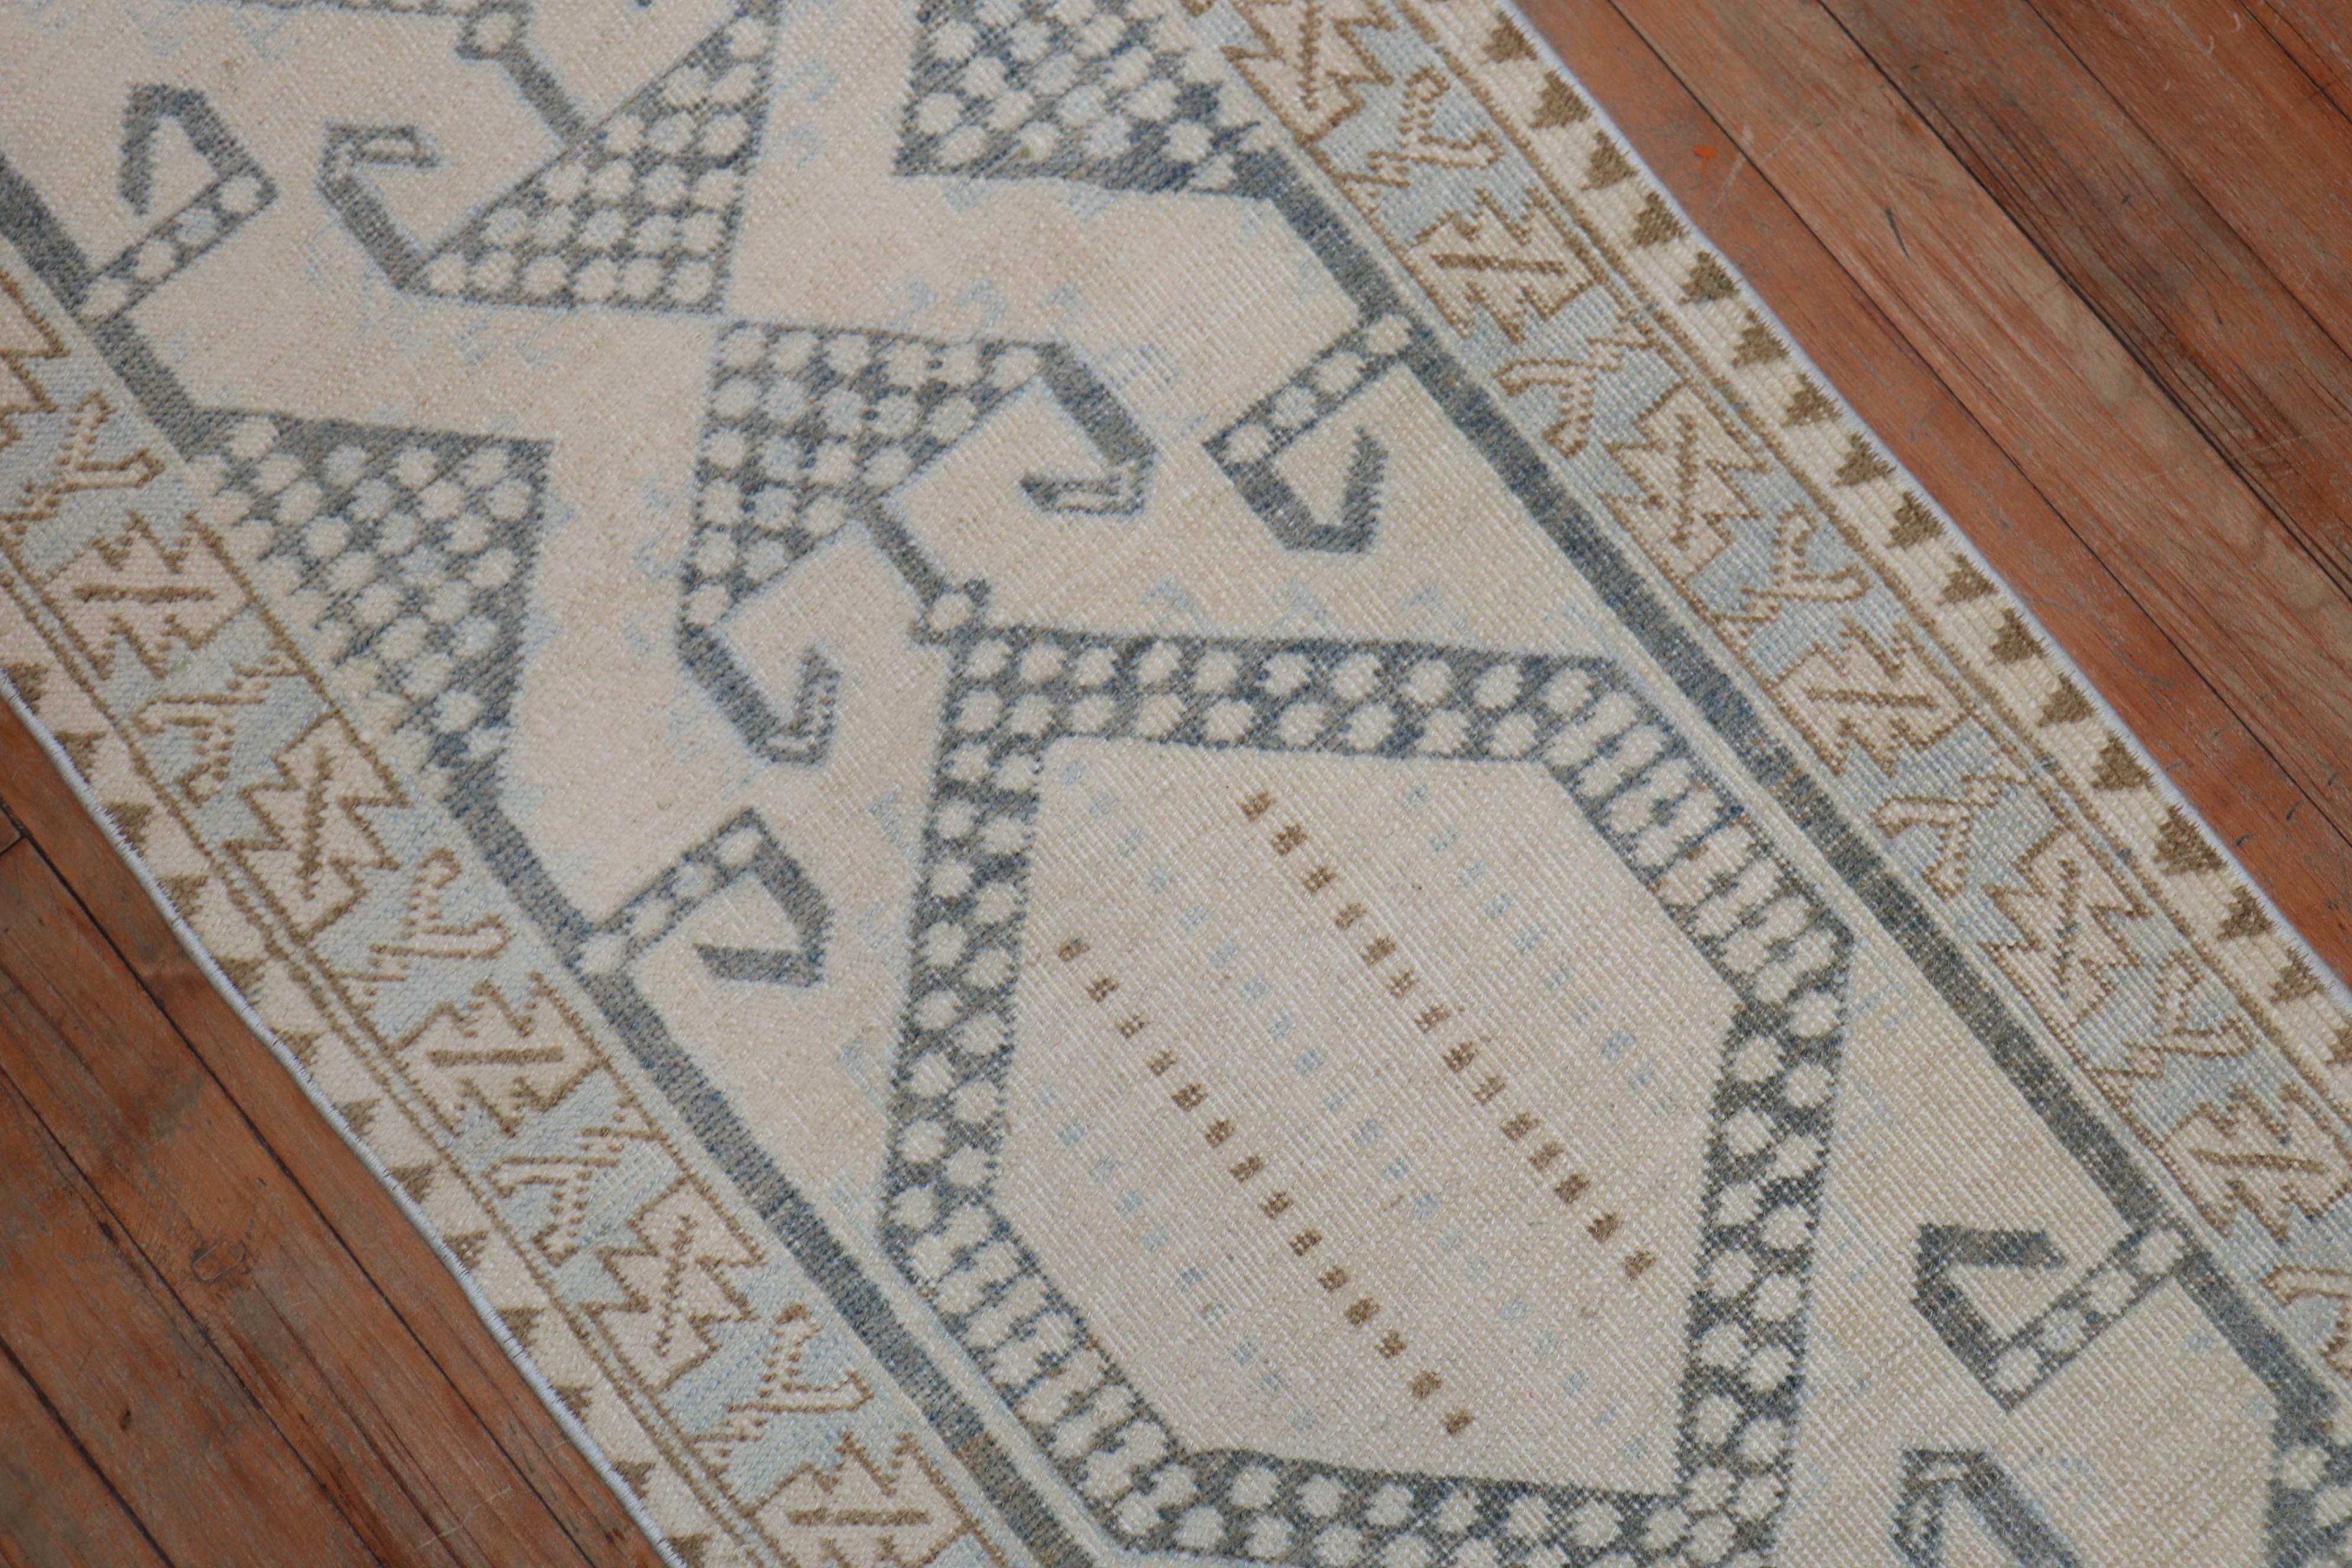 Narrow Neutral Color Persian Runner, Mid-20th Century For Sale 2